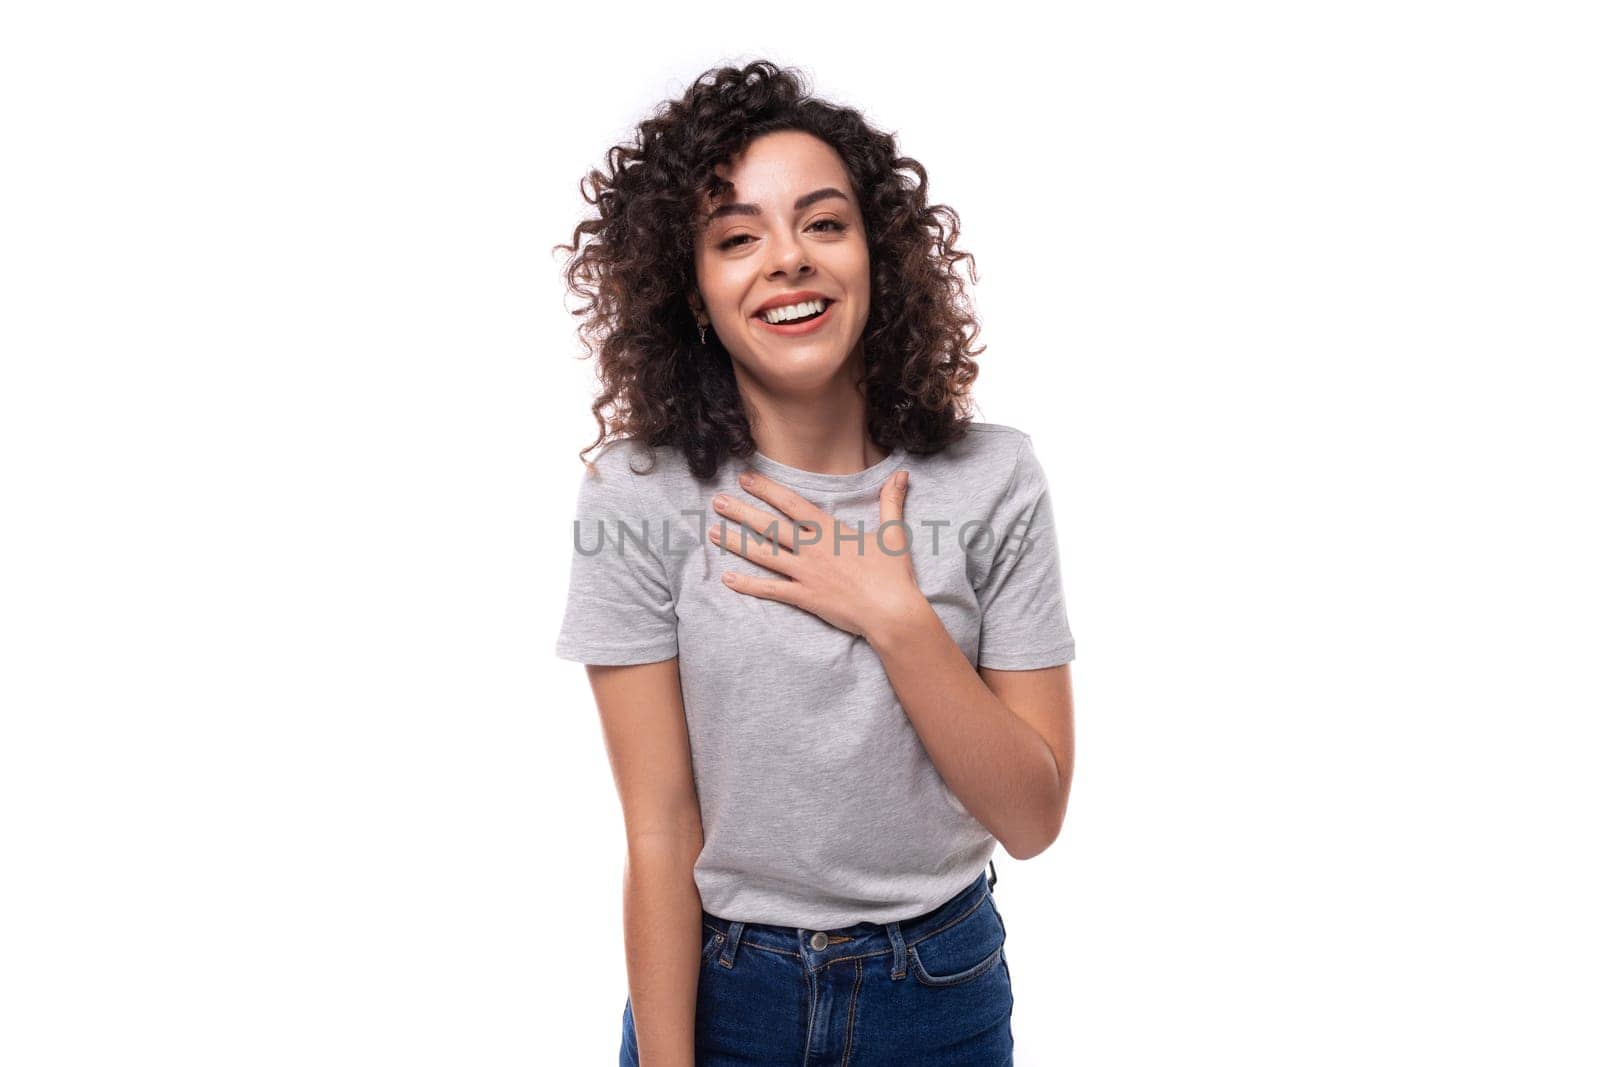 kind slender young caucasian woman with careless black curly hair is dressed in a gray t-shirt on a white background by TRMK